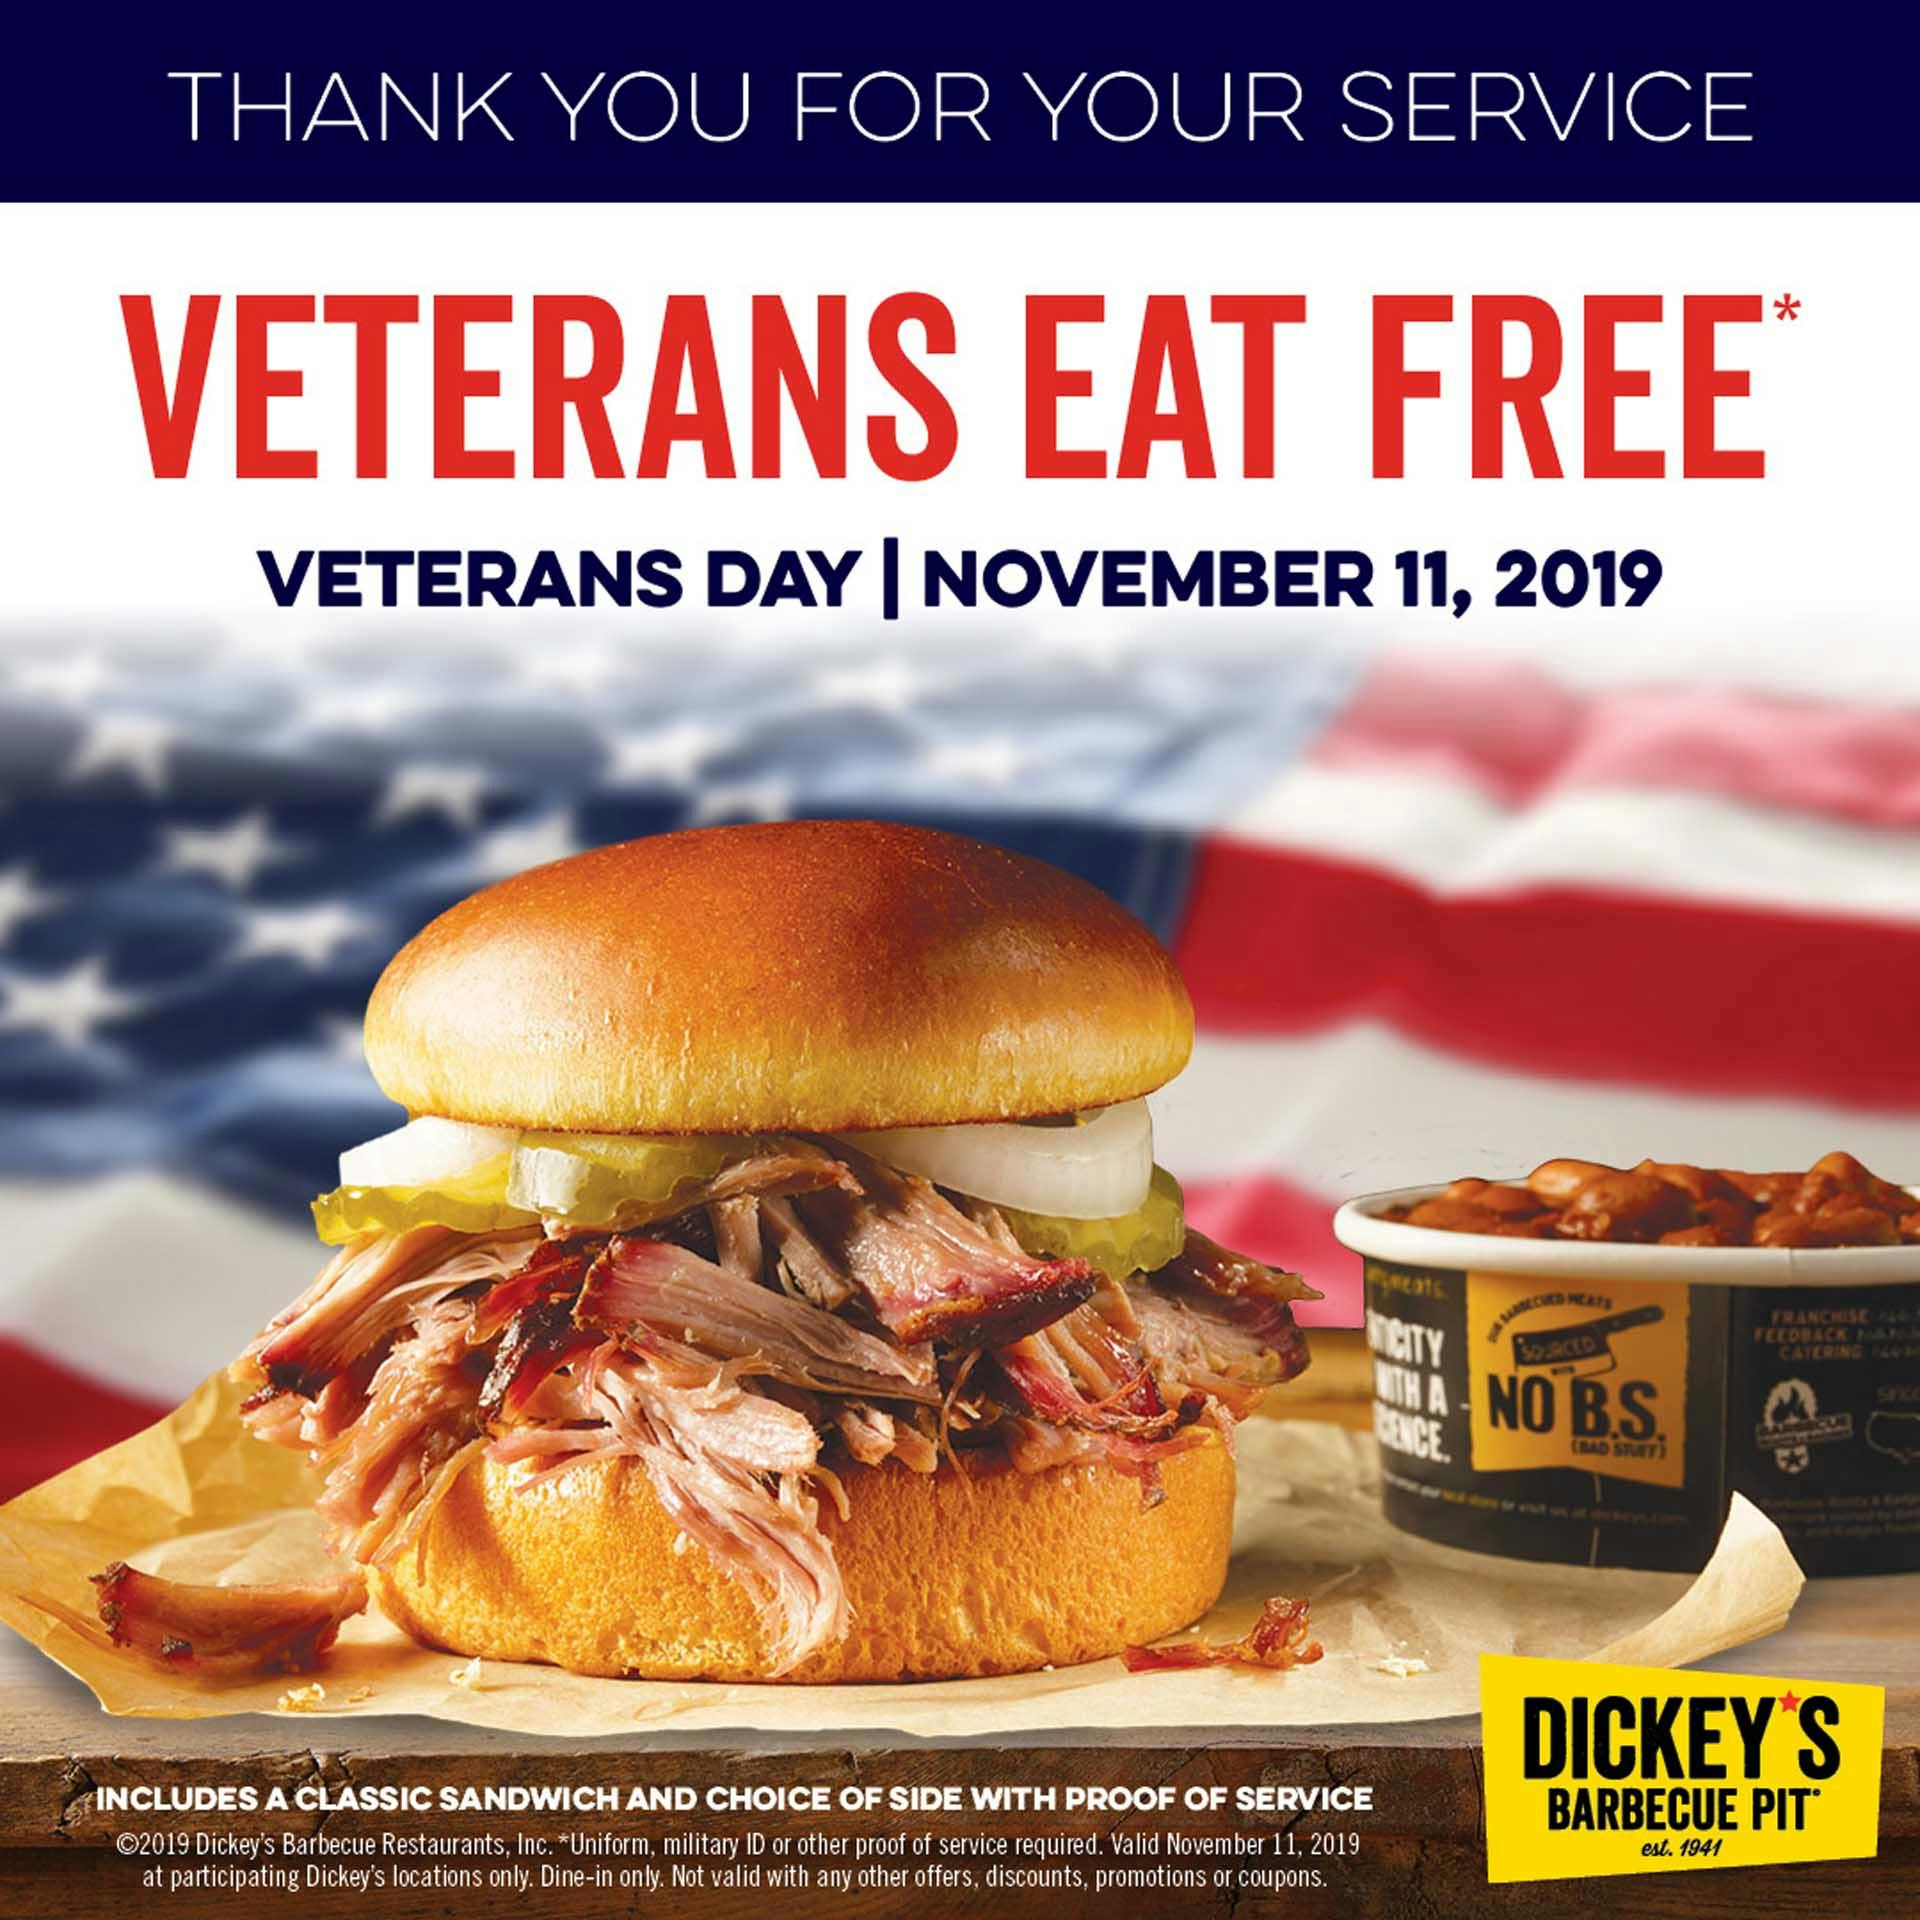 Dickey’s Barbecue Pit Honors Those Who Served With Free Barbecue This Veterans Day